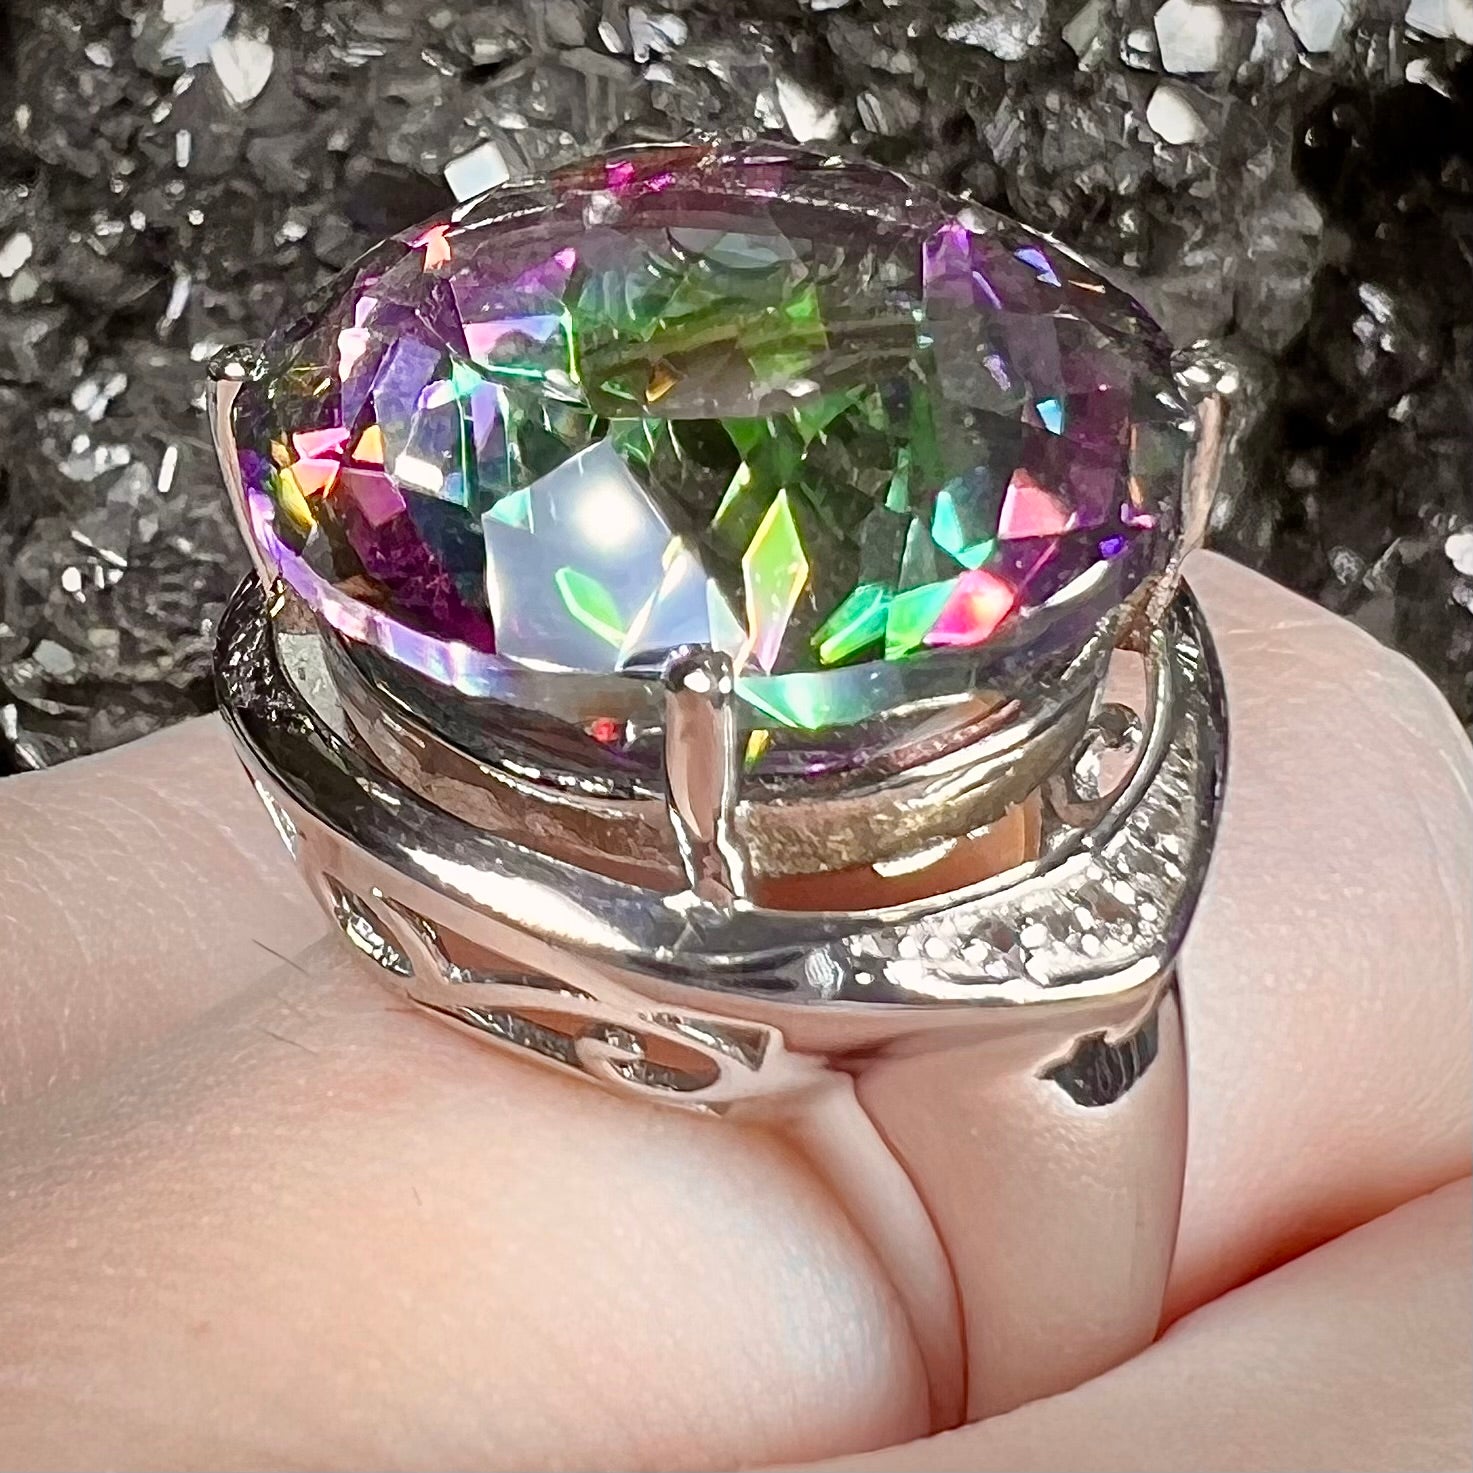 A large, round cut pink and green mystic topaz set in a sterling silver ring with white topaz accent stones.